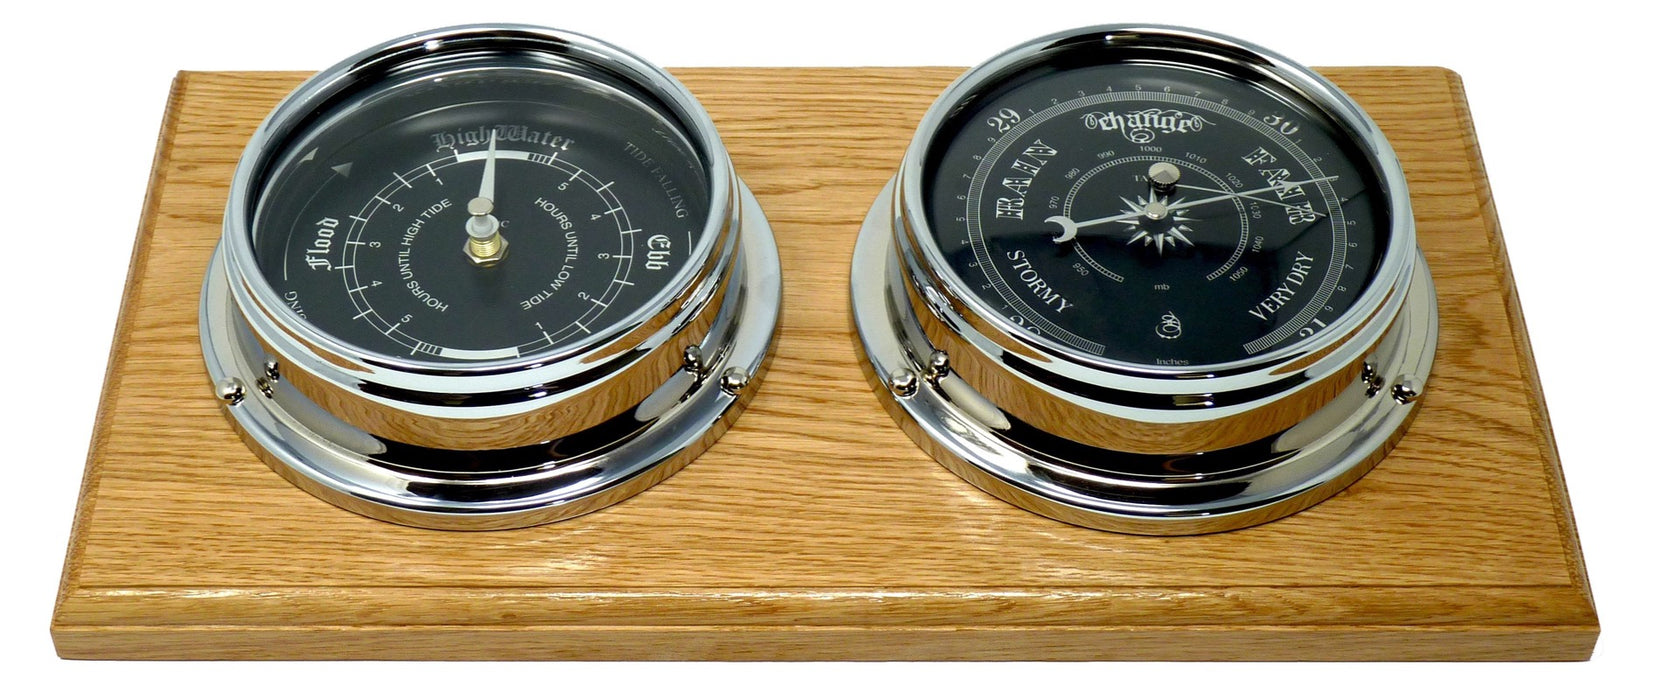 Weather Scientific Tabic Clocks Handmade Prestige Traditional Barometer and Tide Clock in Chrome, Mounted on a Double English Oak Wall Mount Tabic Clocks 